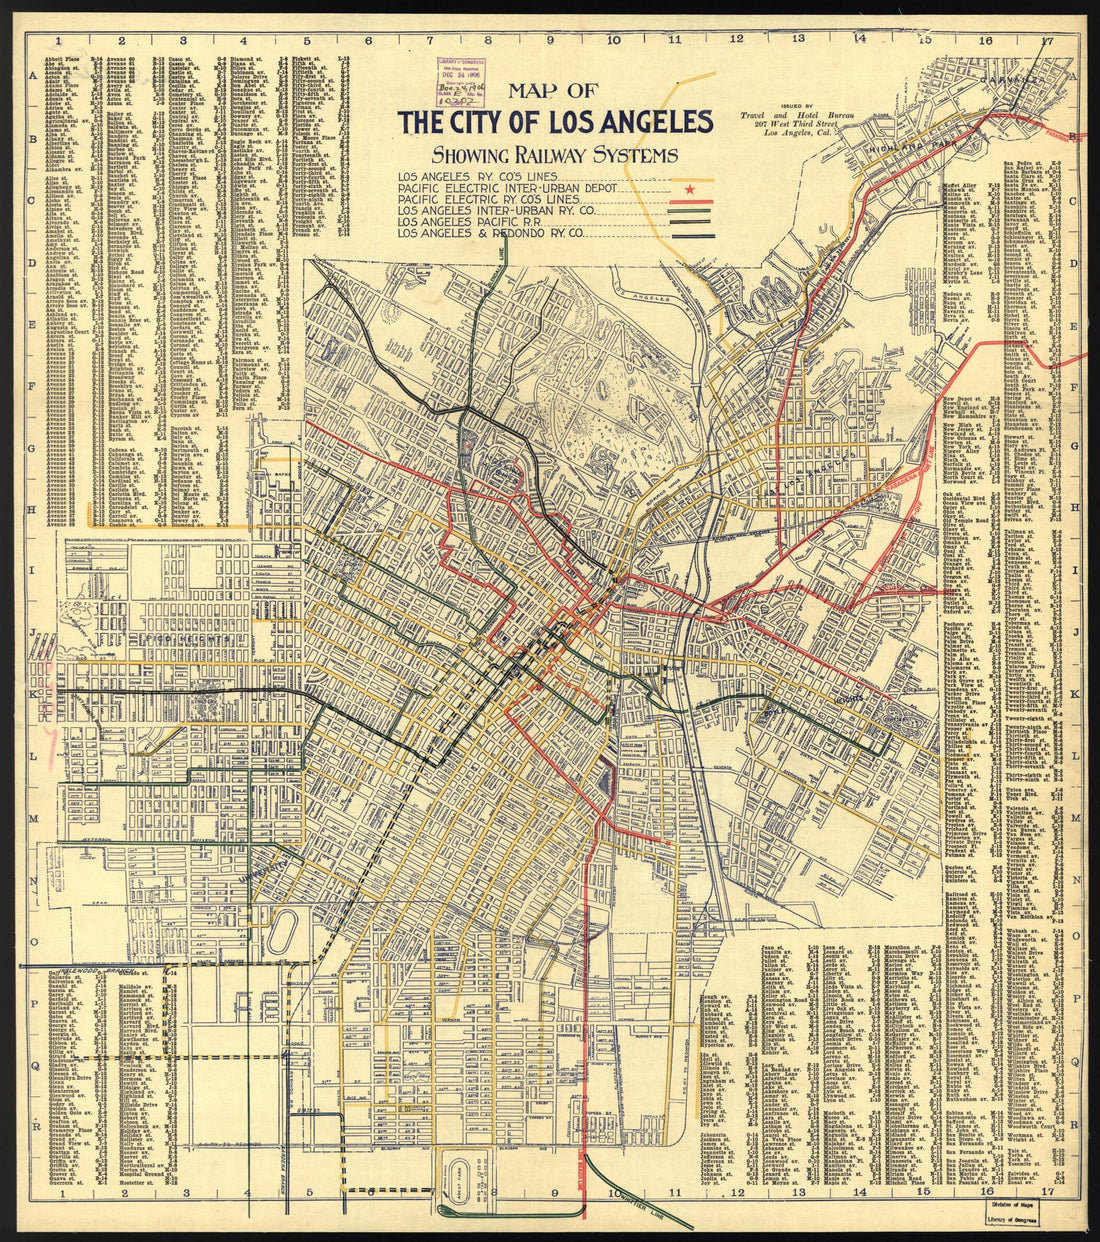 This old map of Map of the City of Los Angeles : Showing Railway Systems from 1906 was created by  Travel and Hotel Bureau in 1906